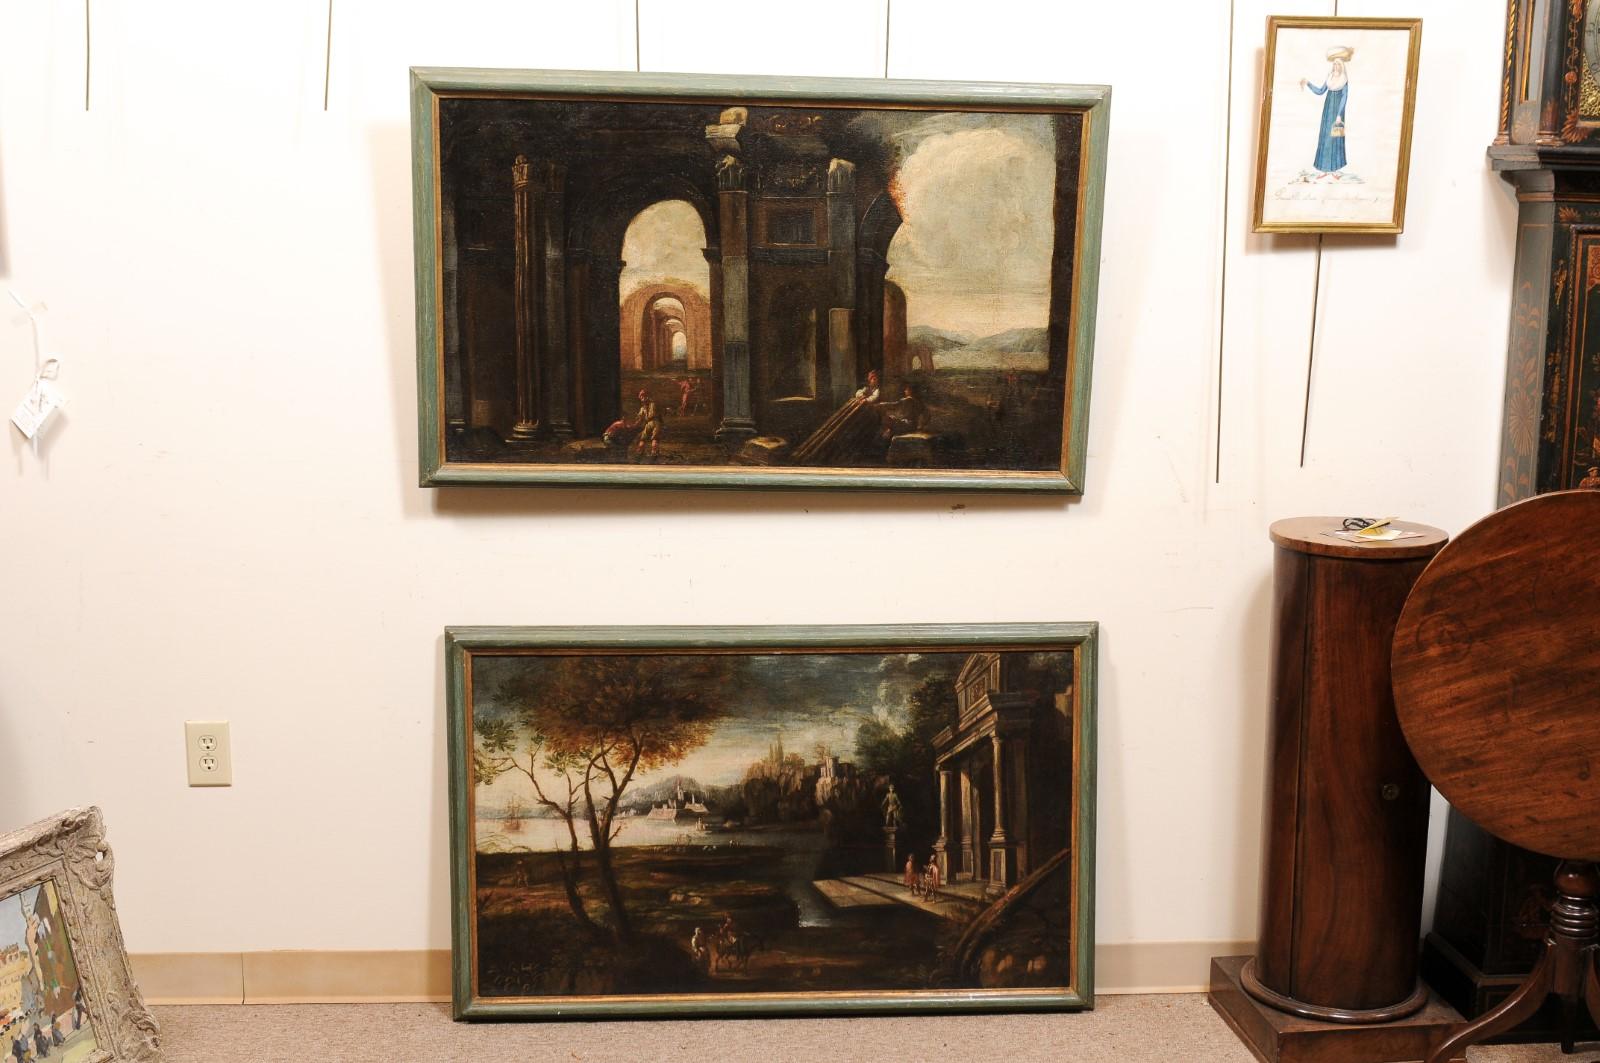 Pair of Large Framed 18th Century Italian Oil on Canvas Paintings of Classical Scenes